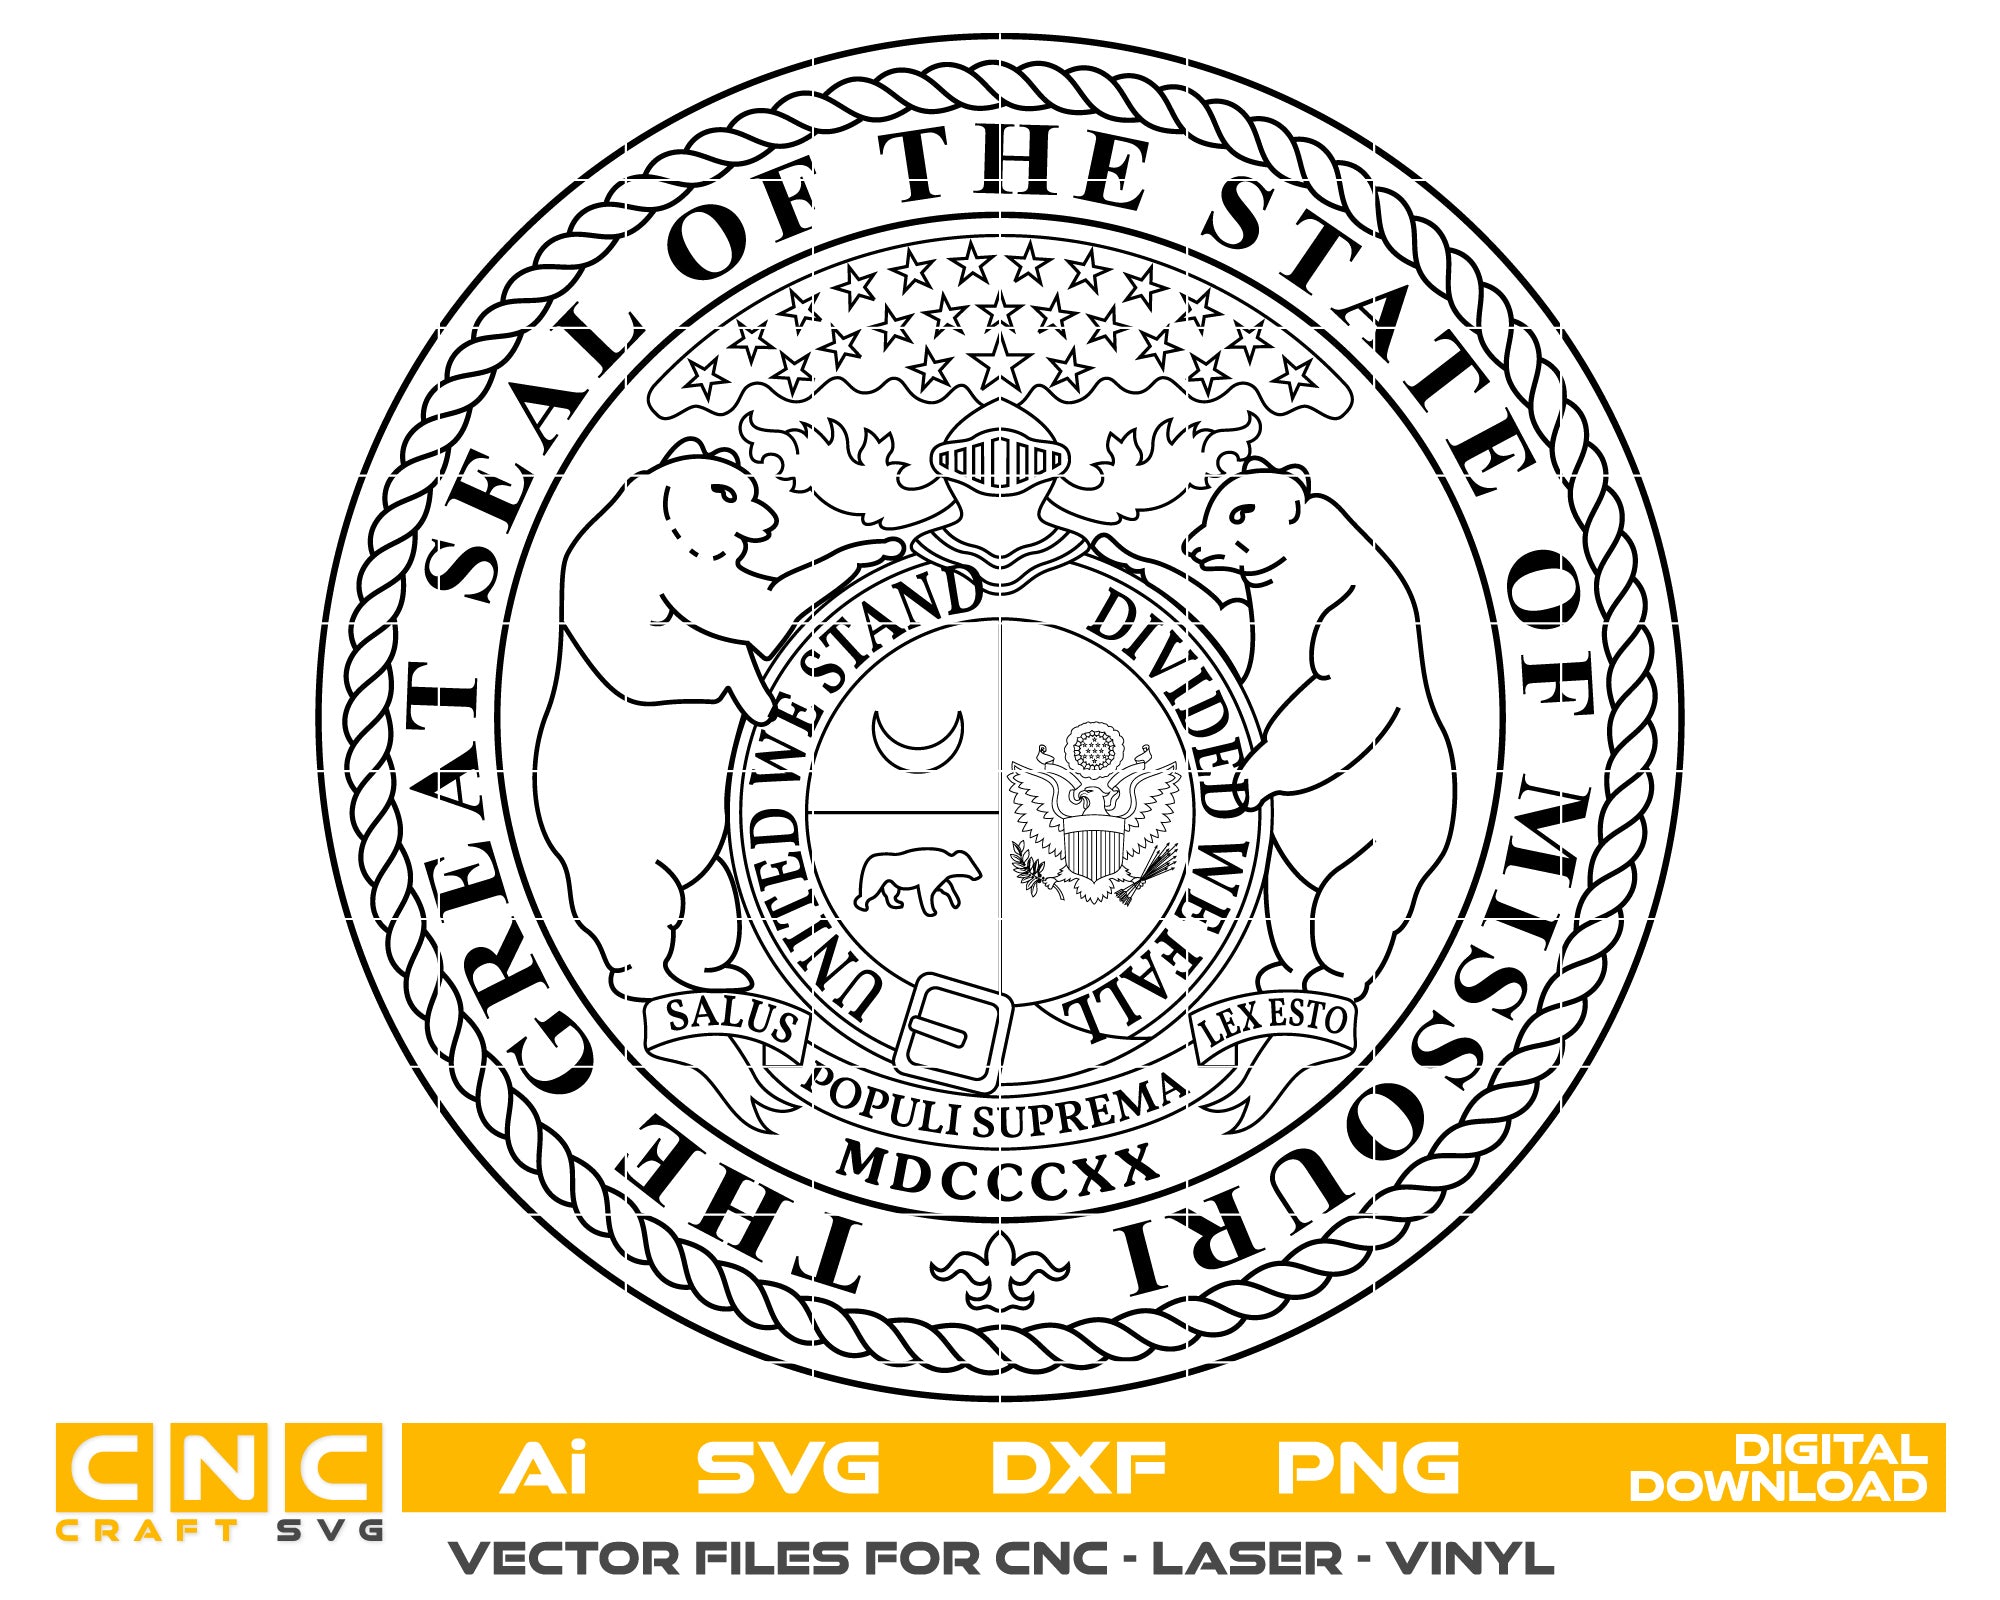 State of Missouri seal vector file